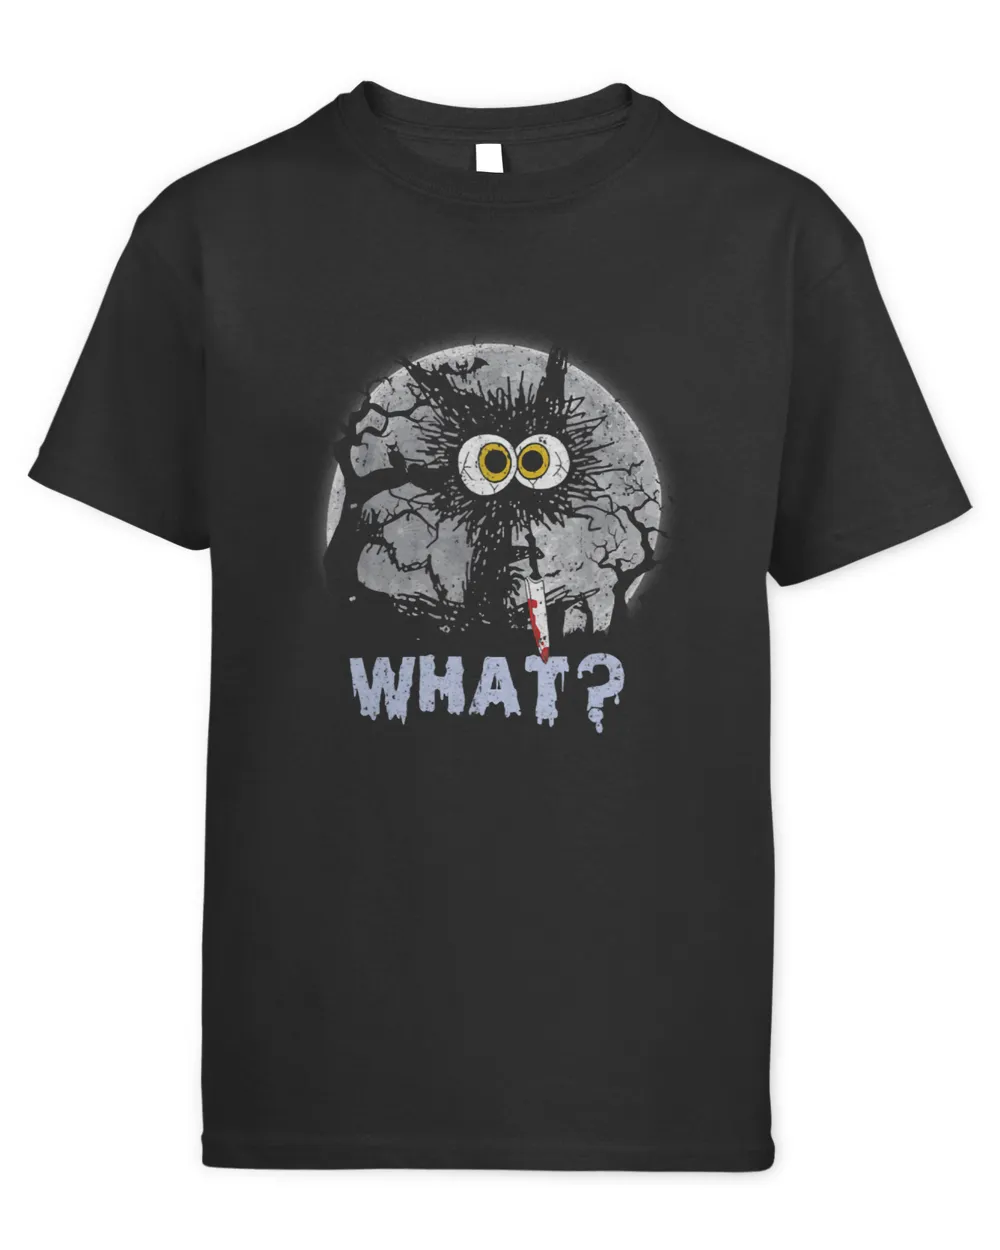 Black Cat Paws What Shirt Funny Black Cat With Knife Killer Halloween